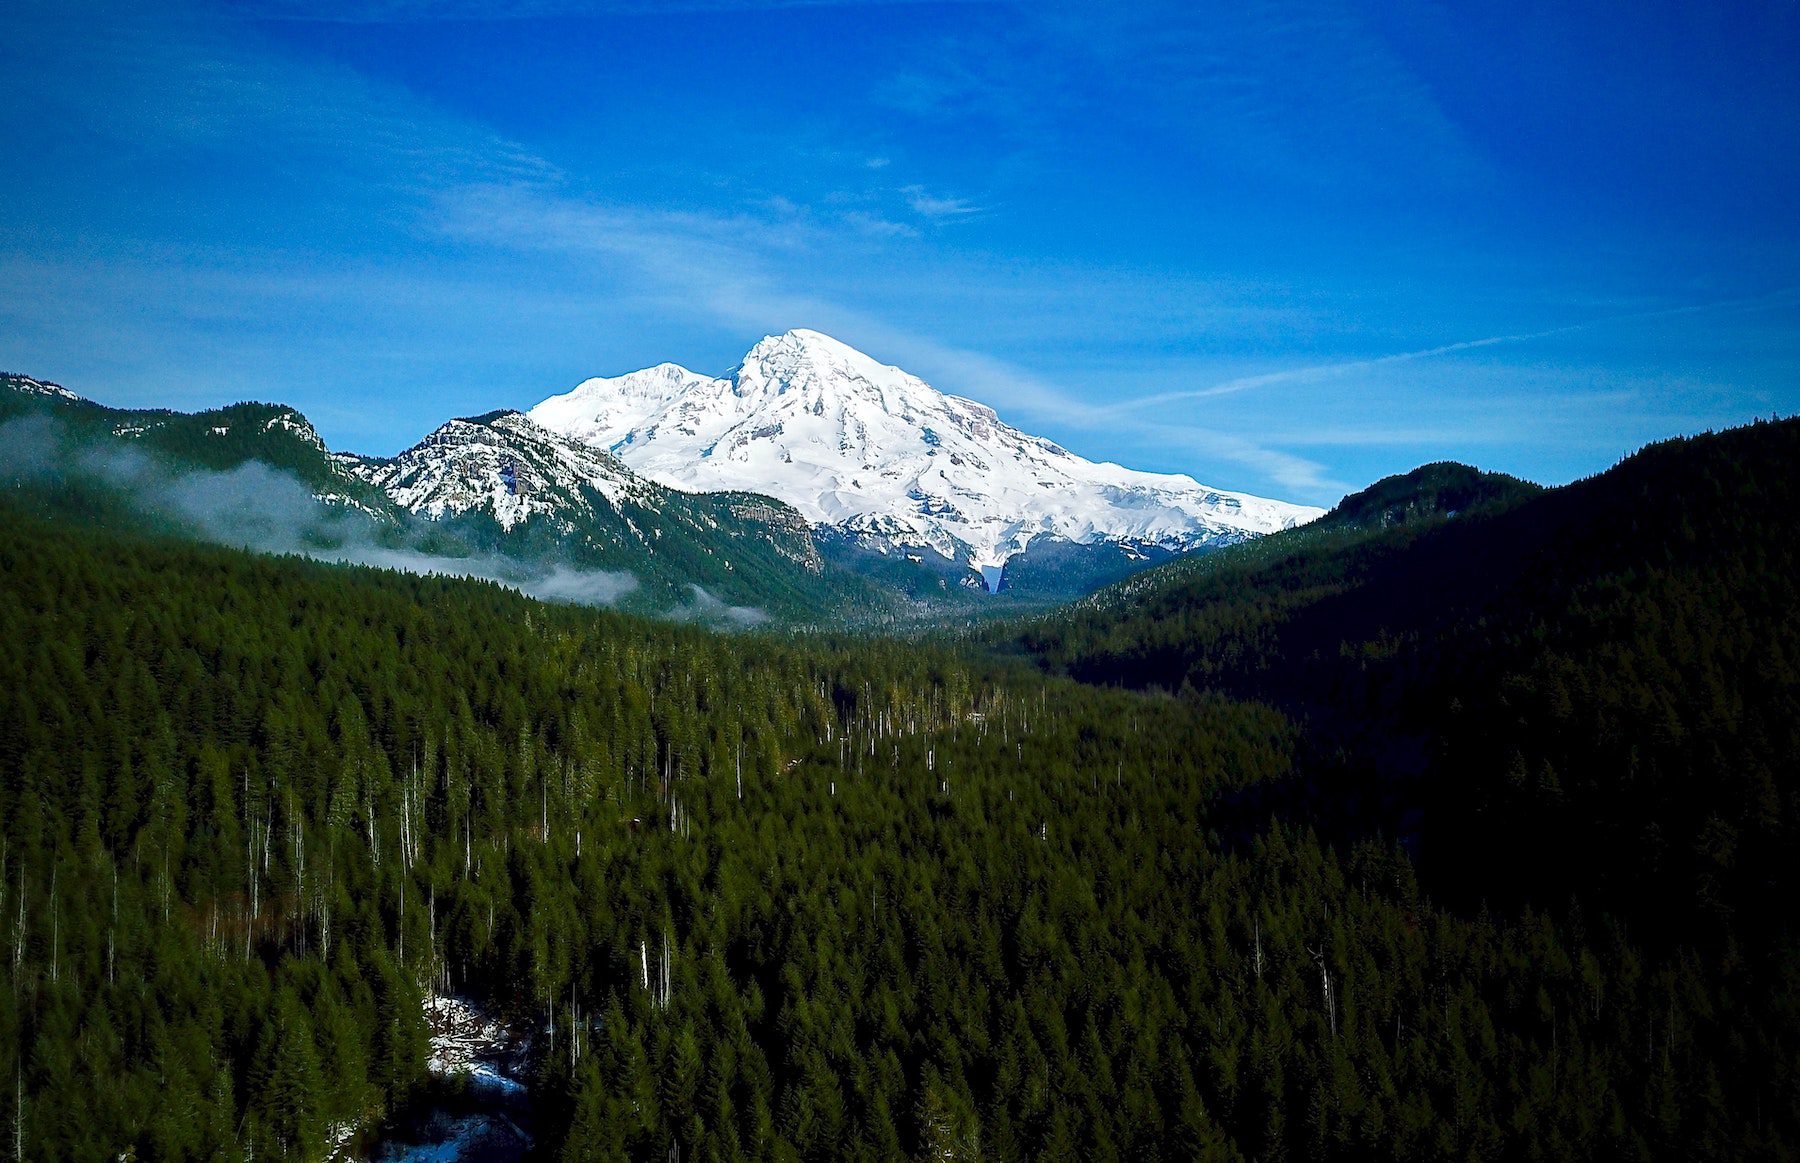 Snowy peaks in the distance over the forest in Mount Rainier National Park.